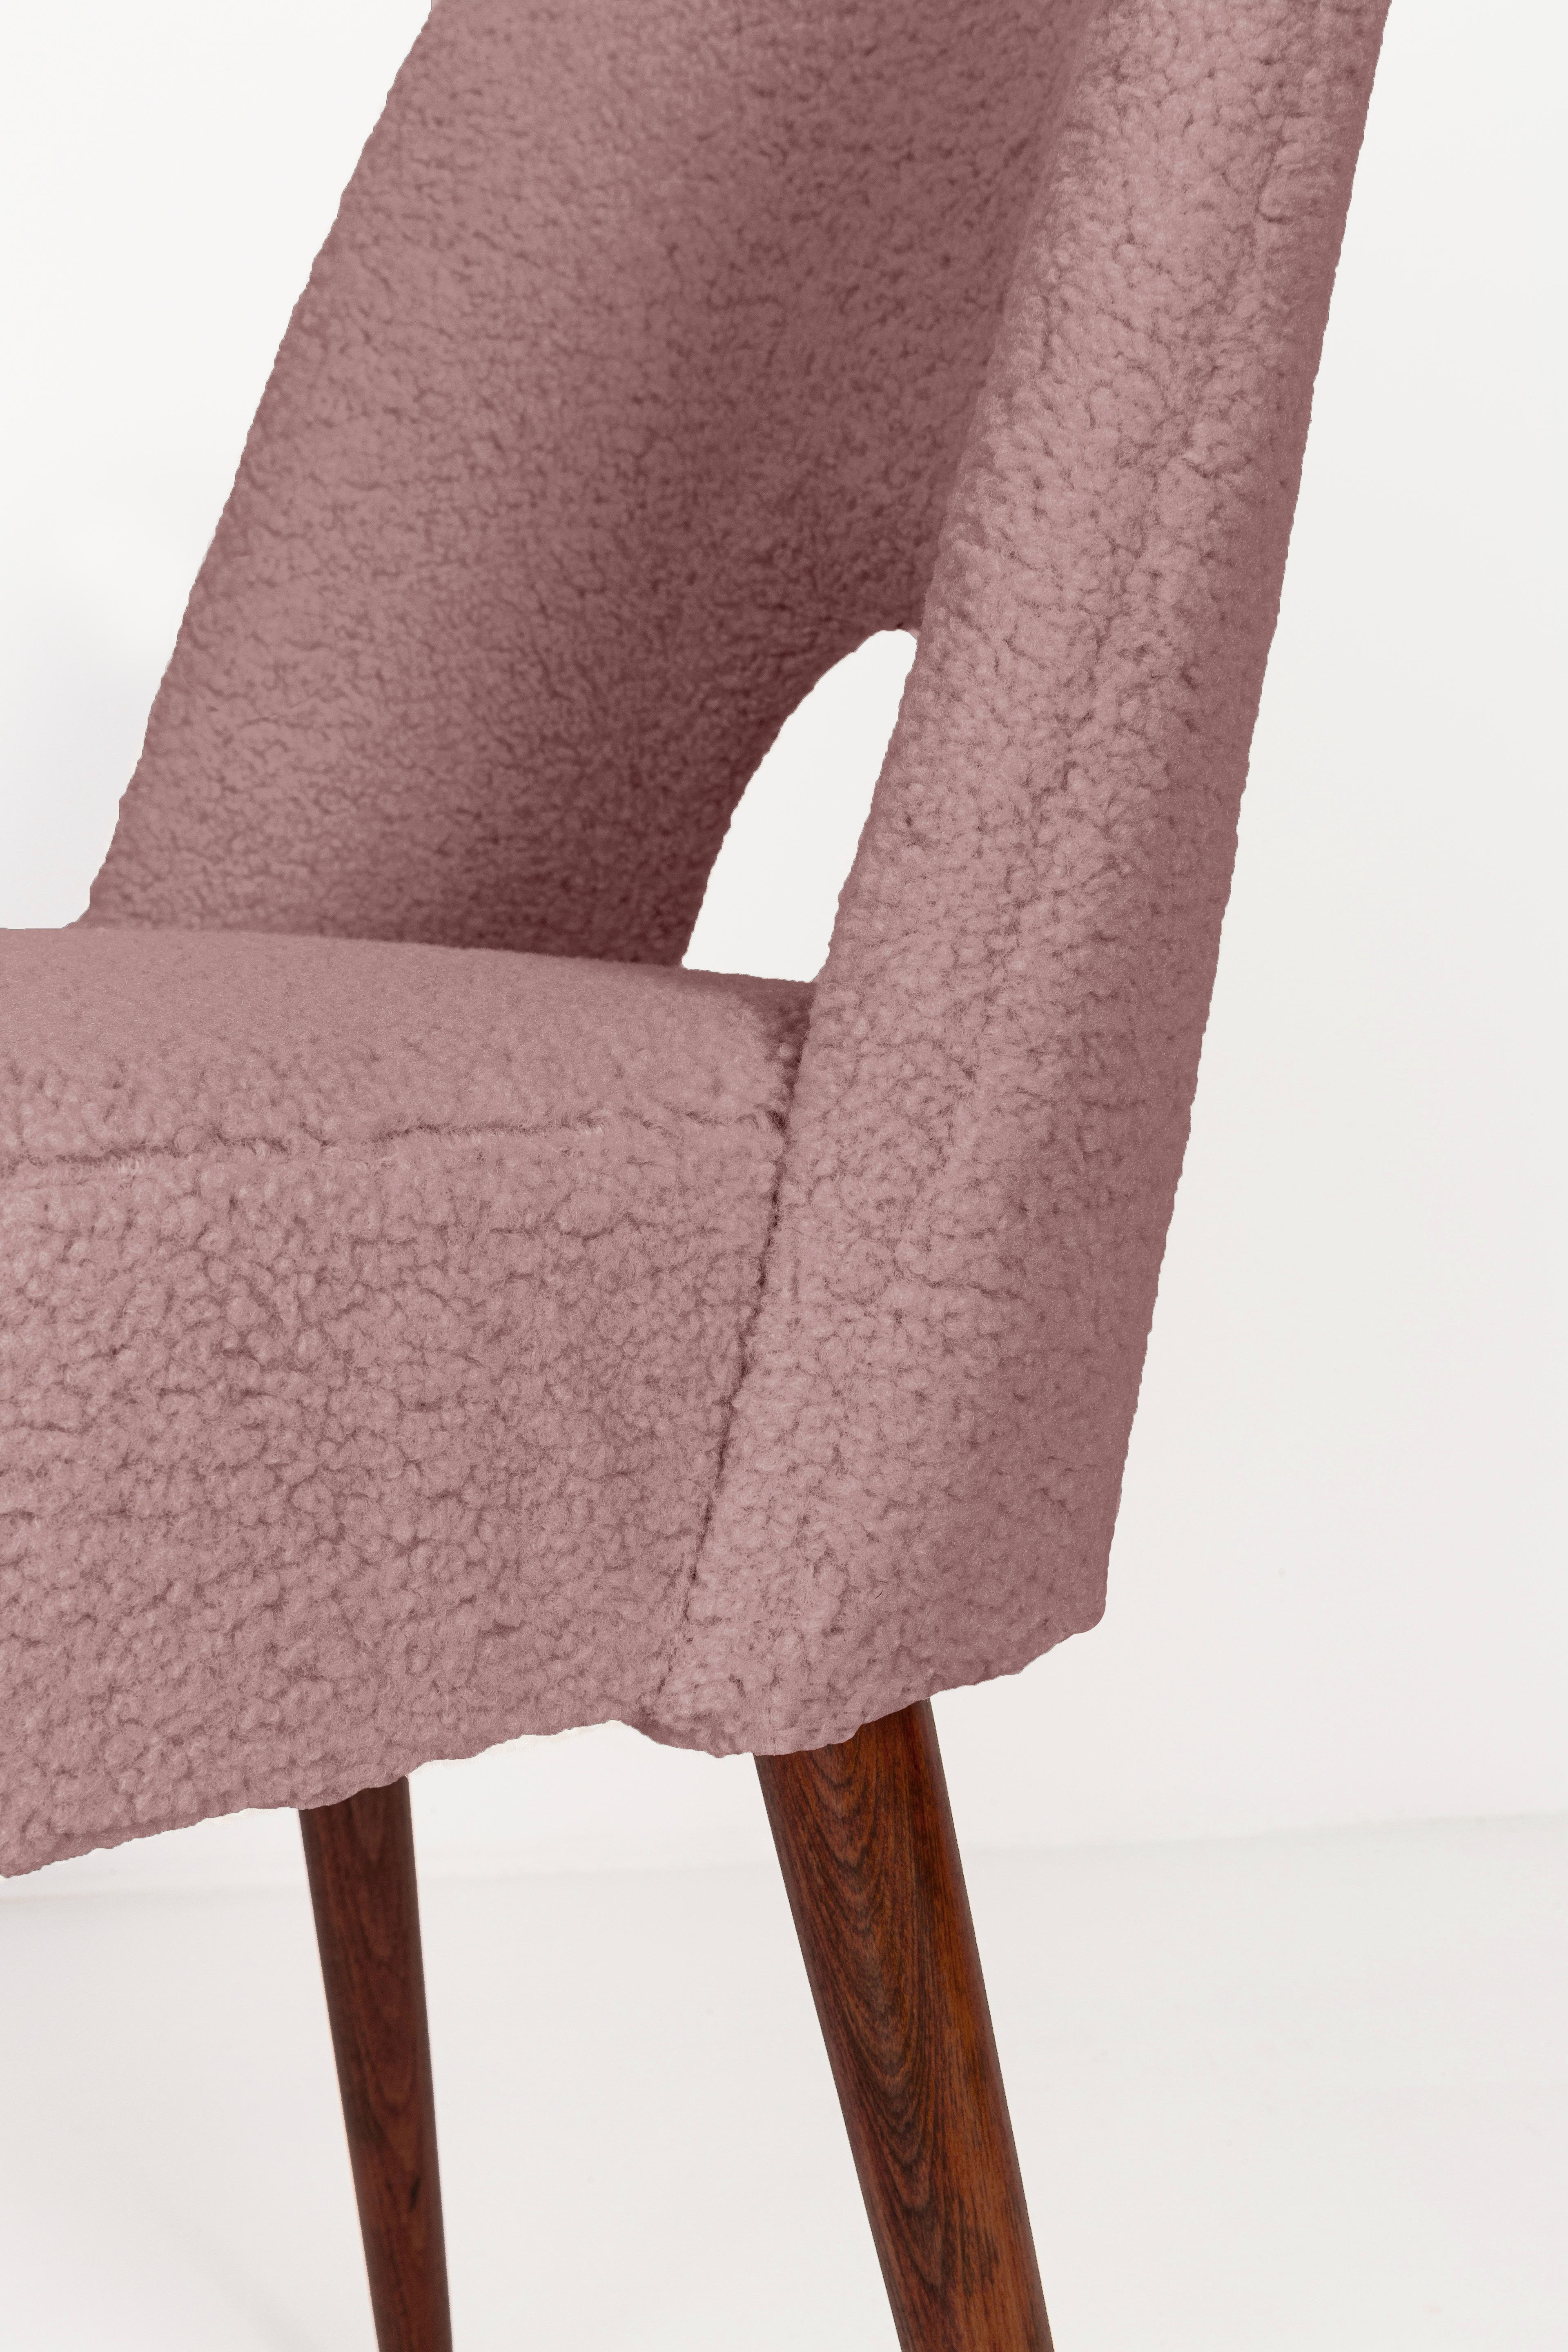 Mid-Century Modern Pink Boucle 'Shell' Chair, 1960s For Sale